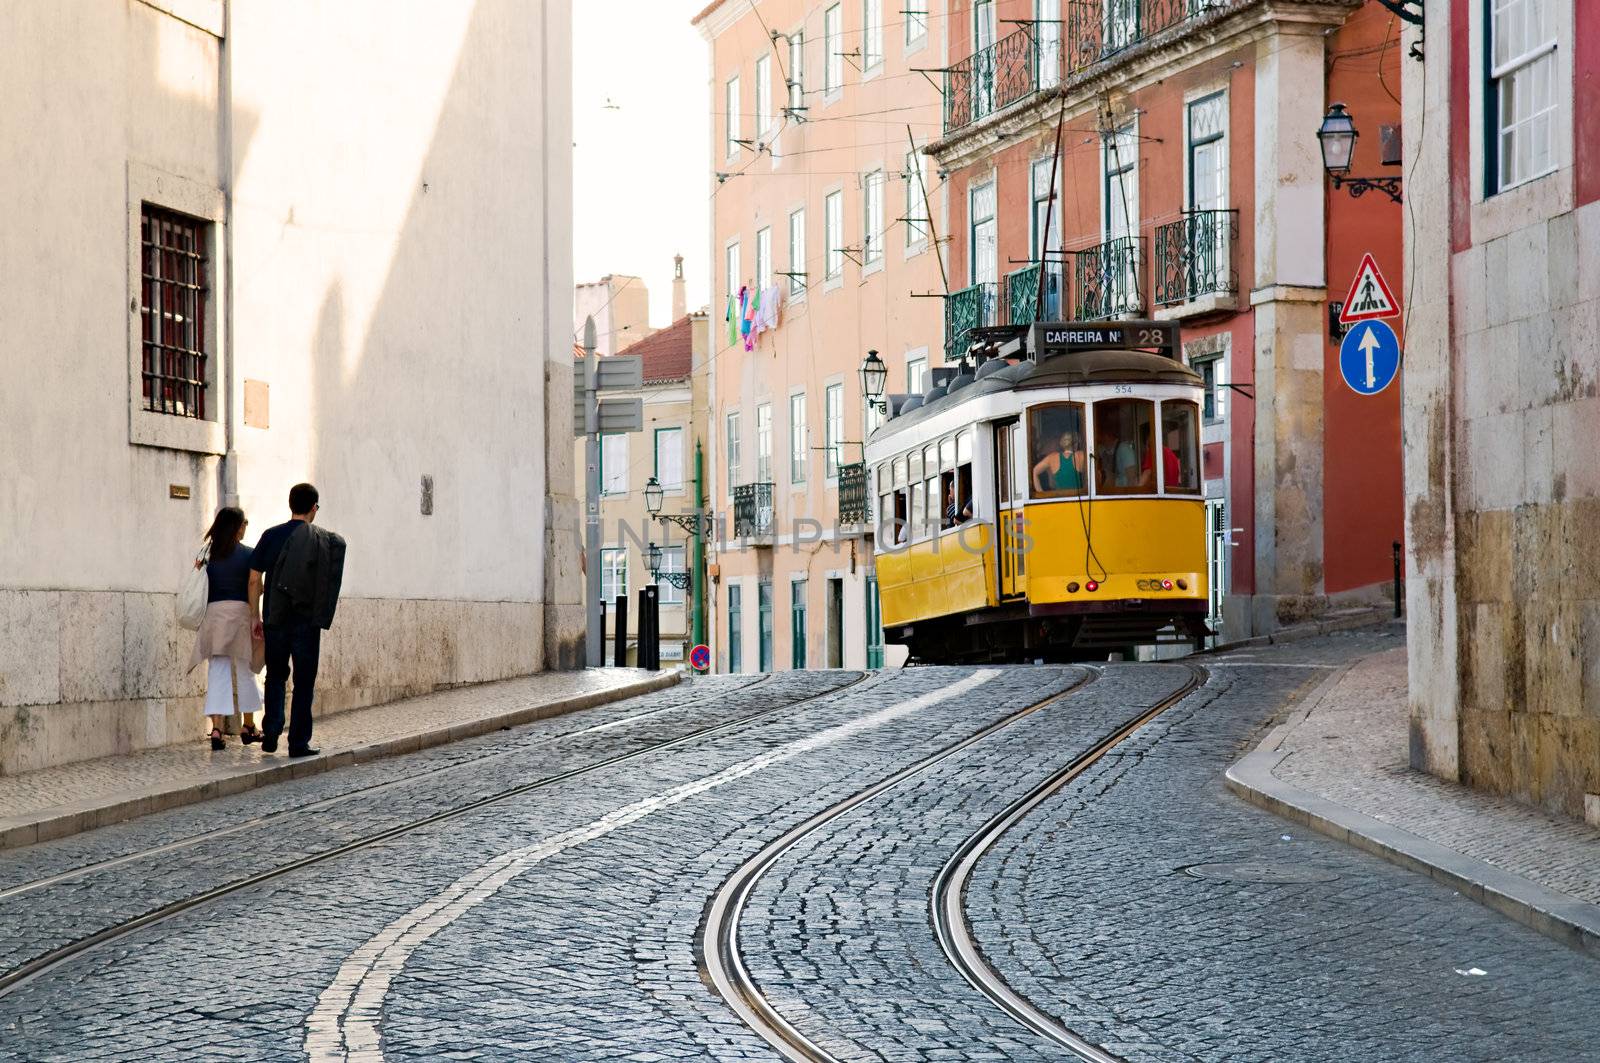 Typical Tram in Commerce Square, Lisbon, Portugal